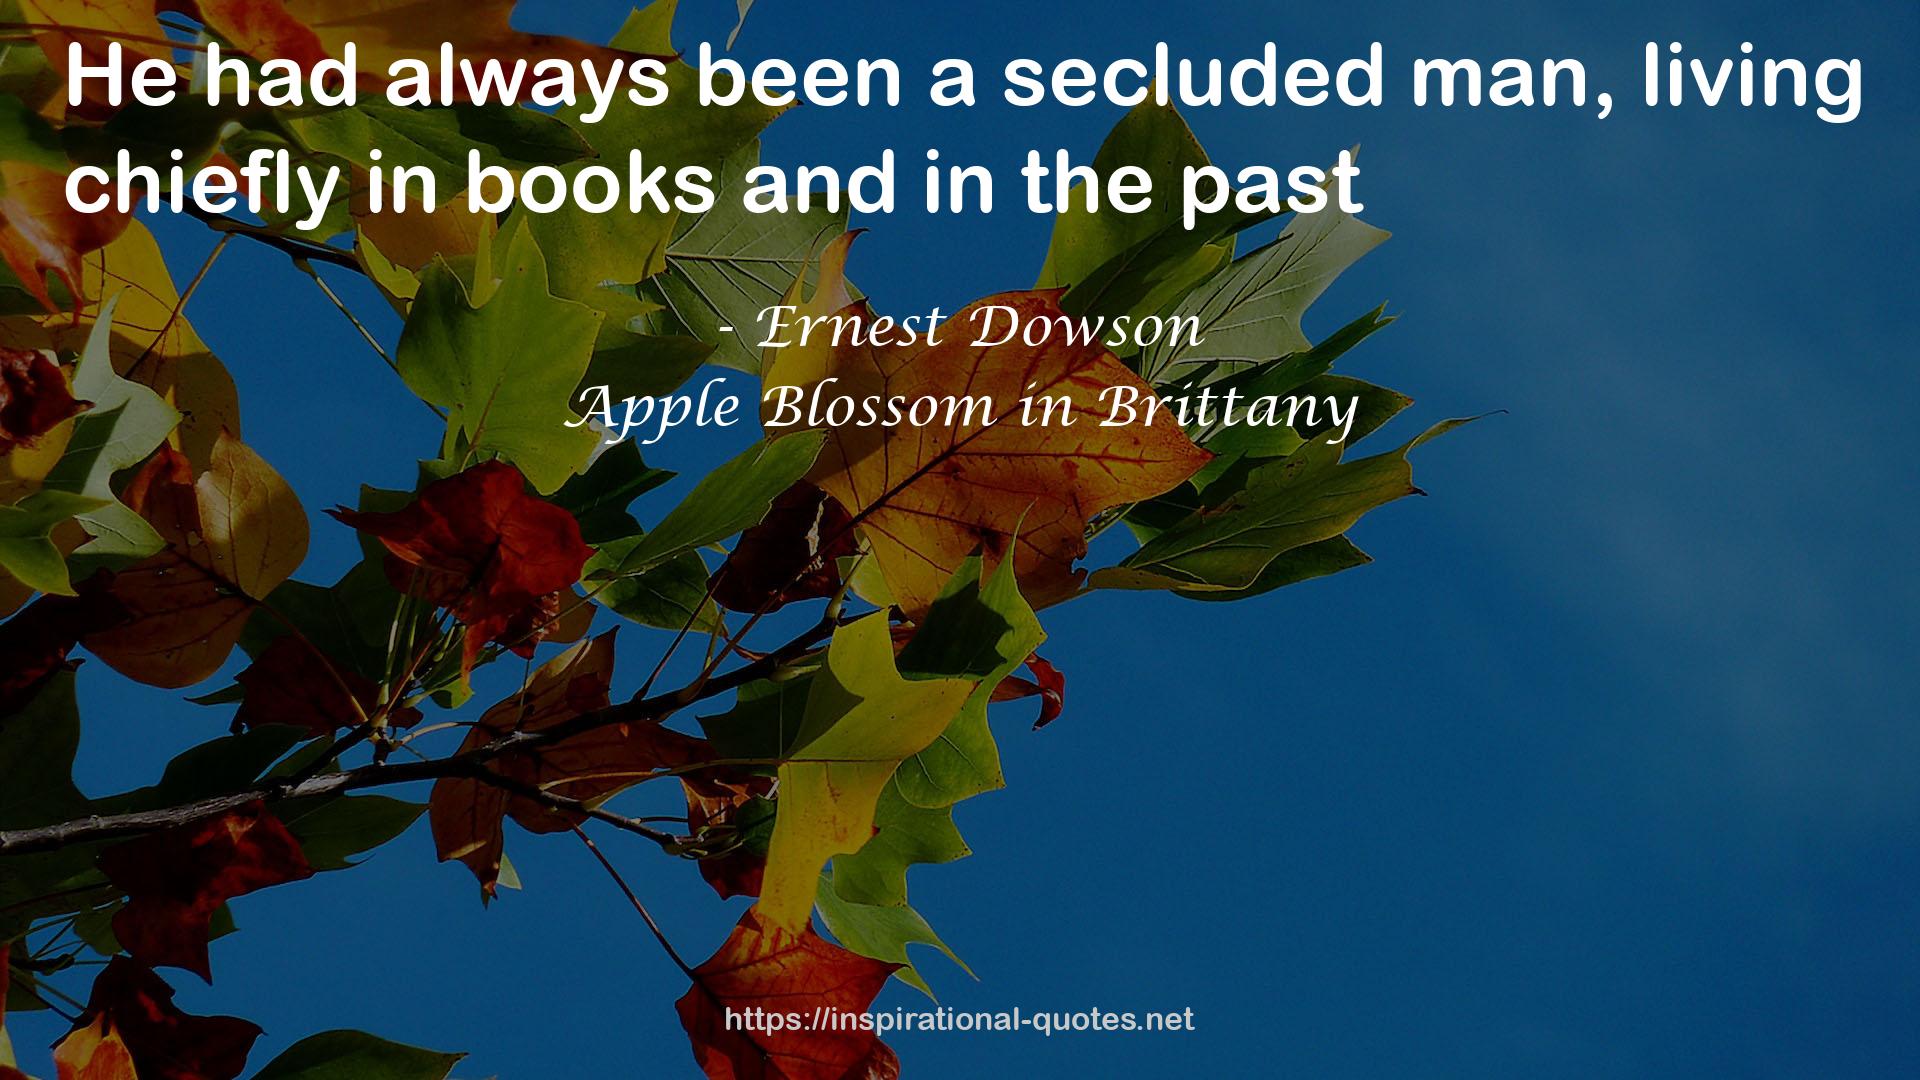 Apple Blossom in Brittany QUOTES